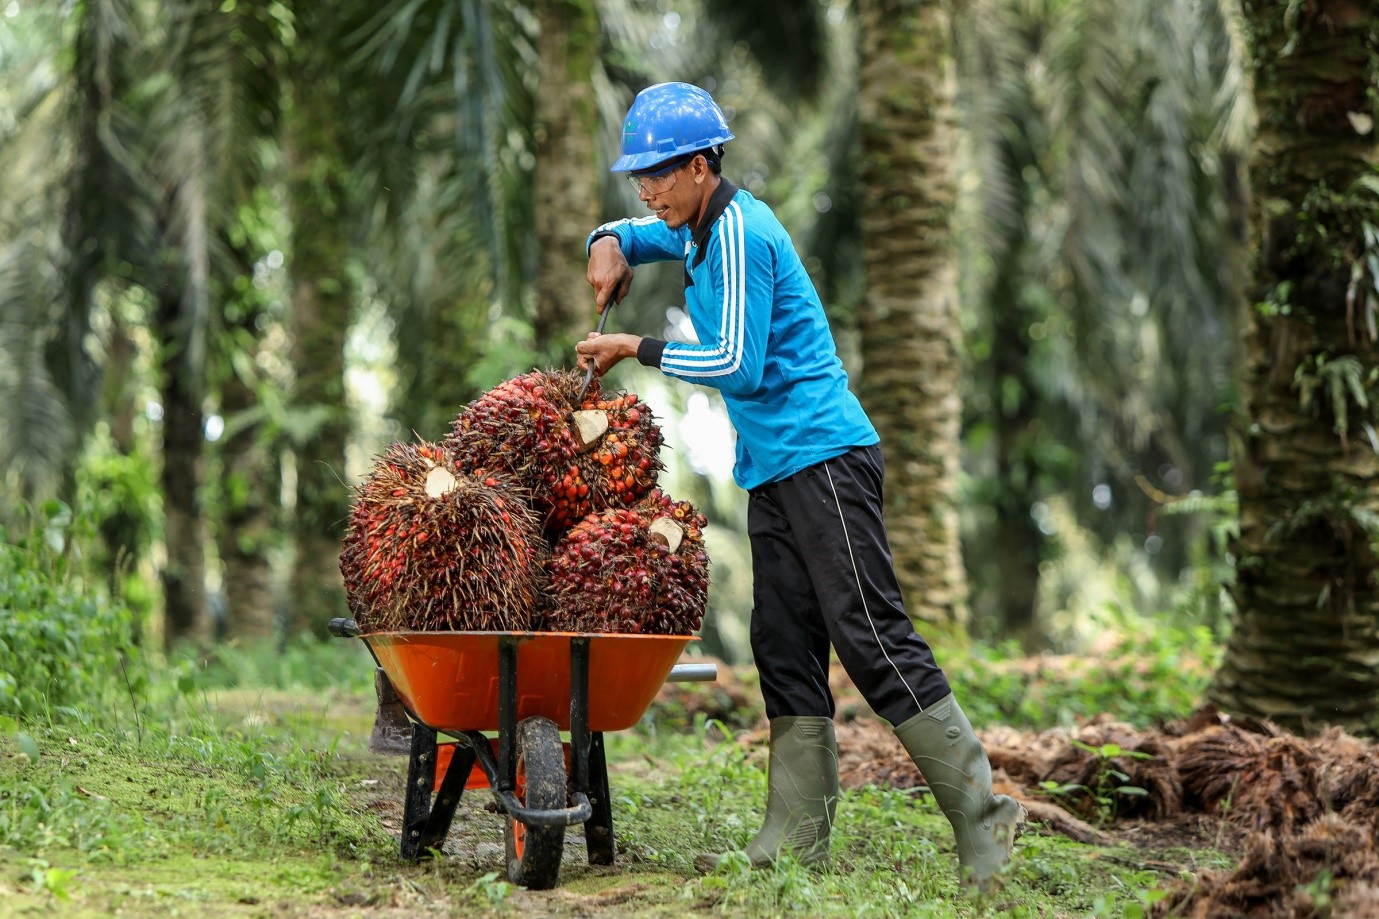 How many tons of crude palm oil and palm kernel oil can I get on an  hectares yearly? - Quora